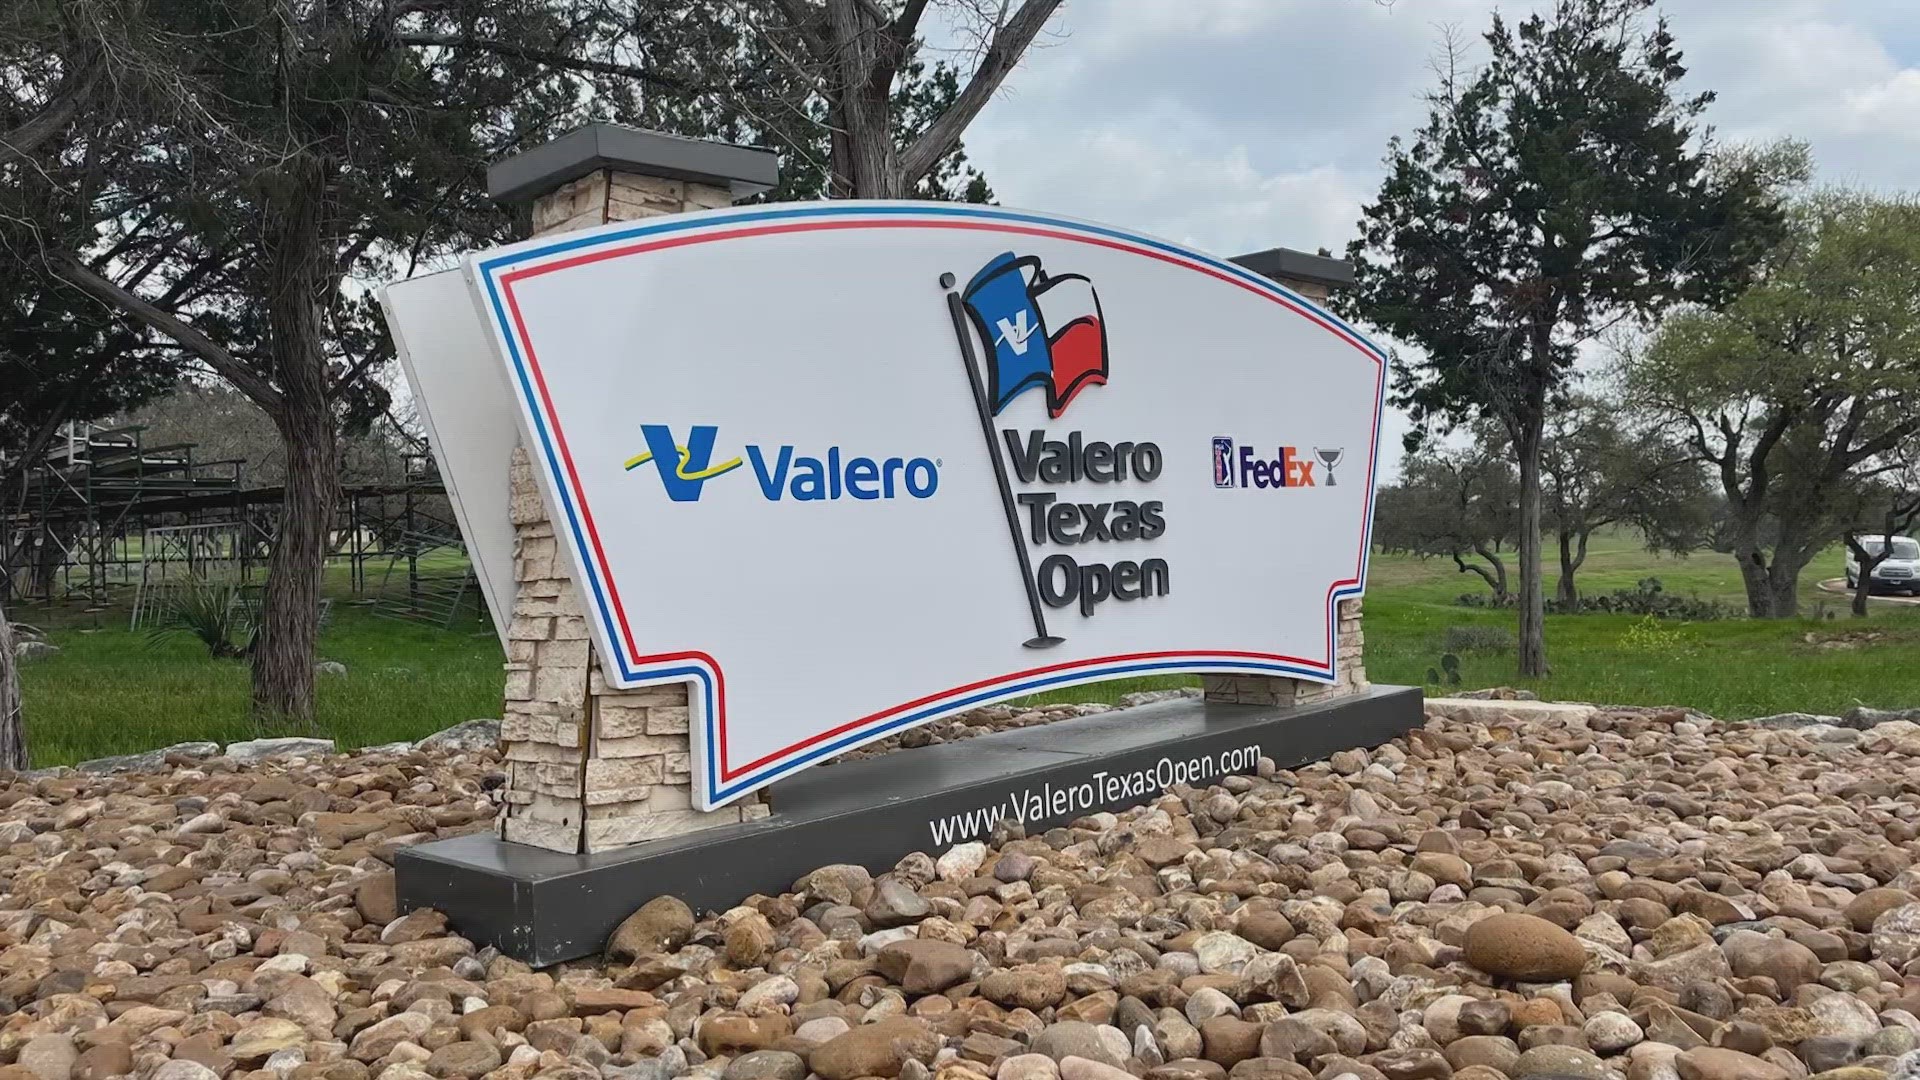 The PGA tour has descended upon San Antonio and the VTO will tee off on Thursday.